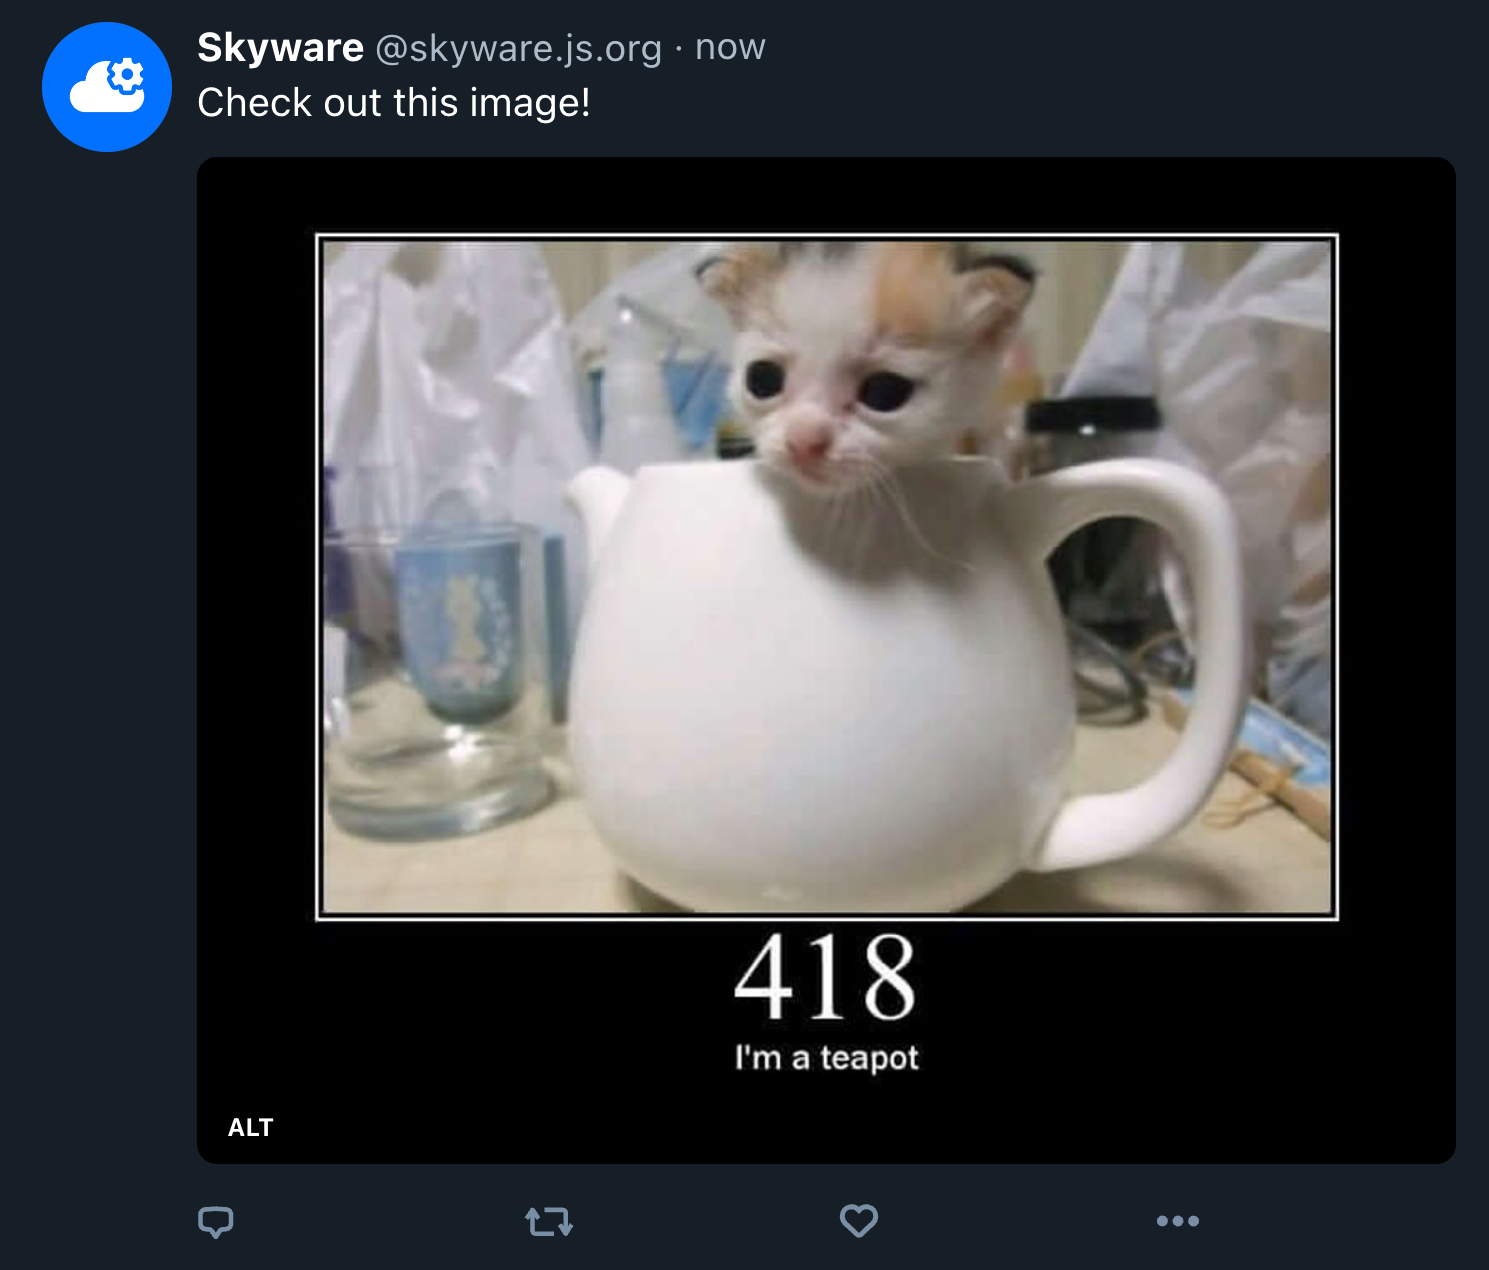 A post by @skyware.js.org reading "Check out this image!". The post contains an image of a cat in a teapot, with the caption "418 I'm a teapot".